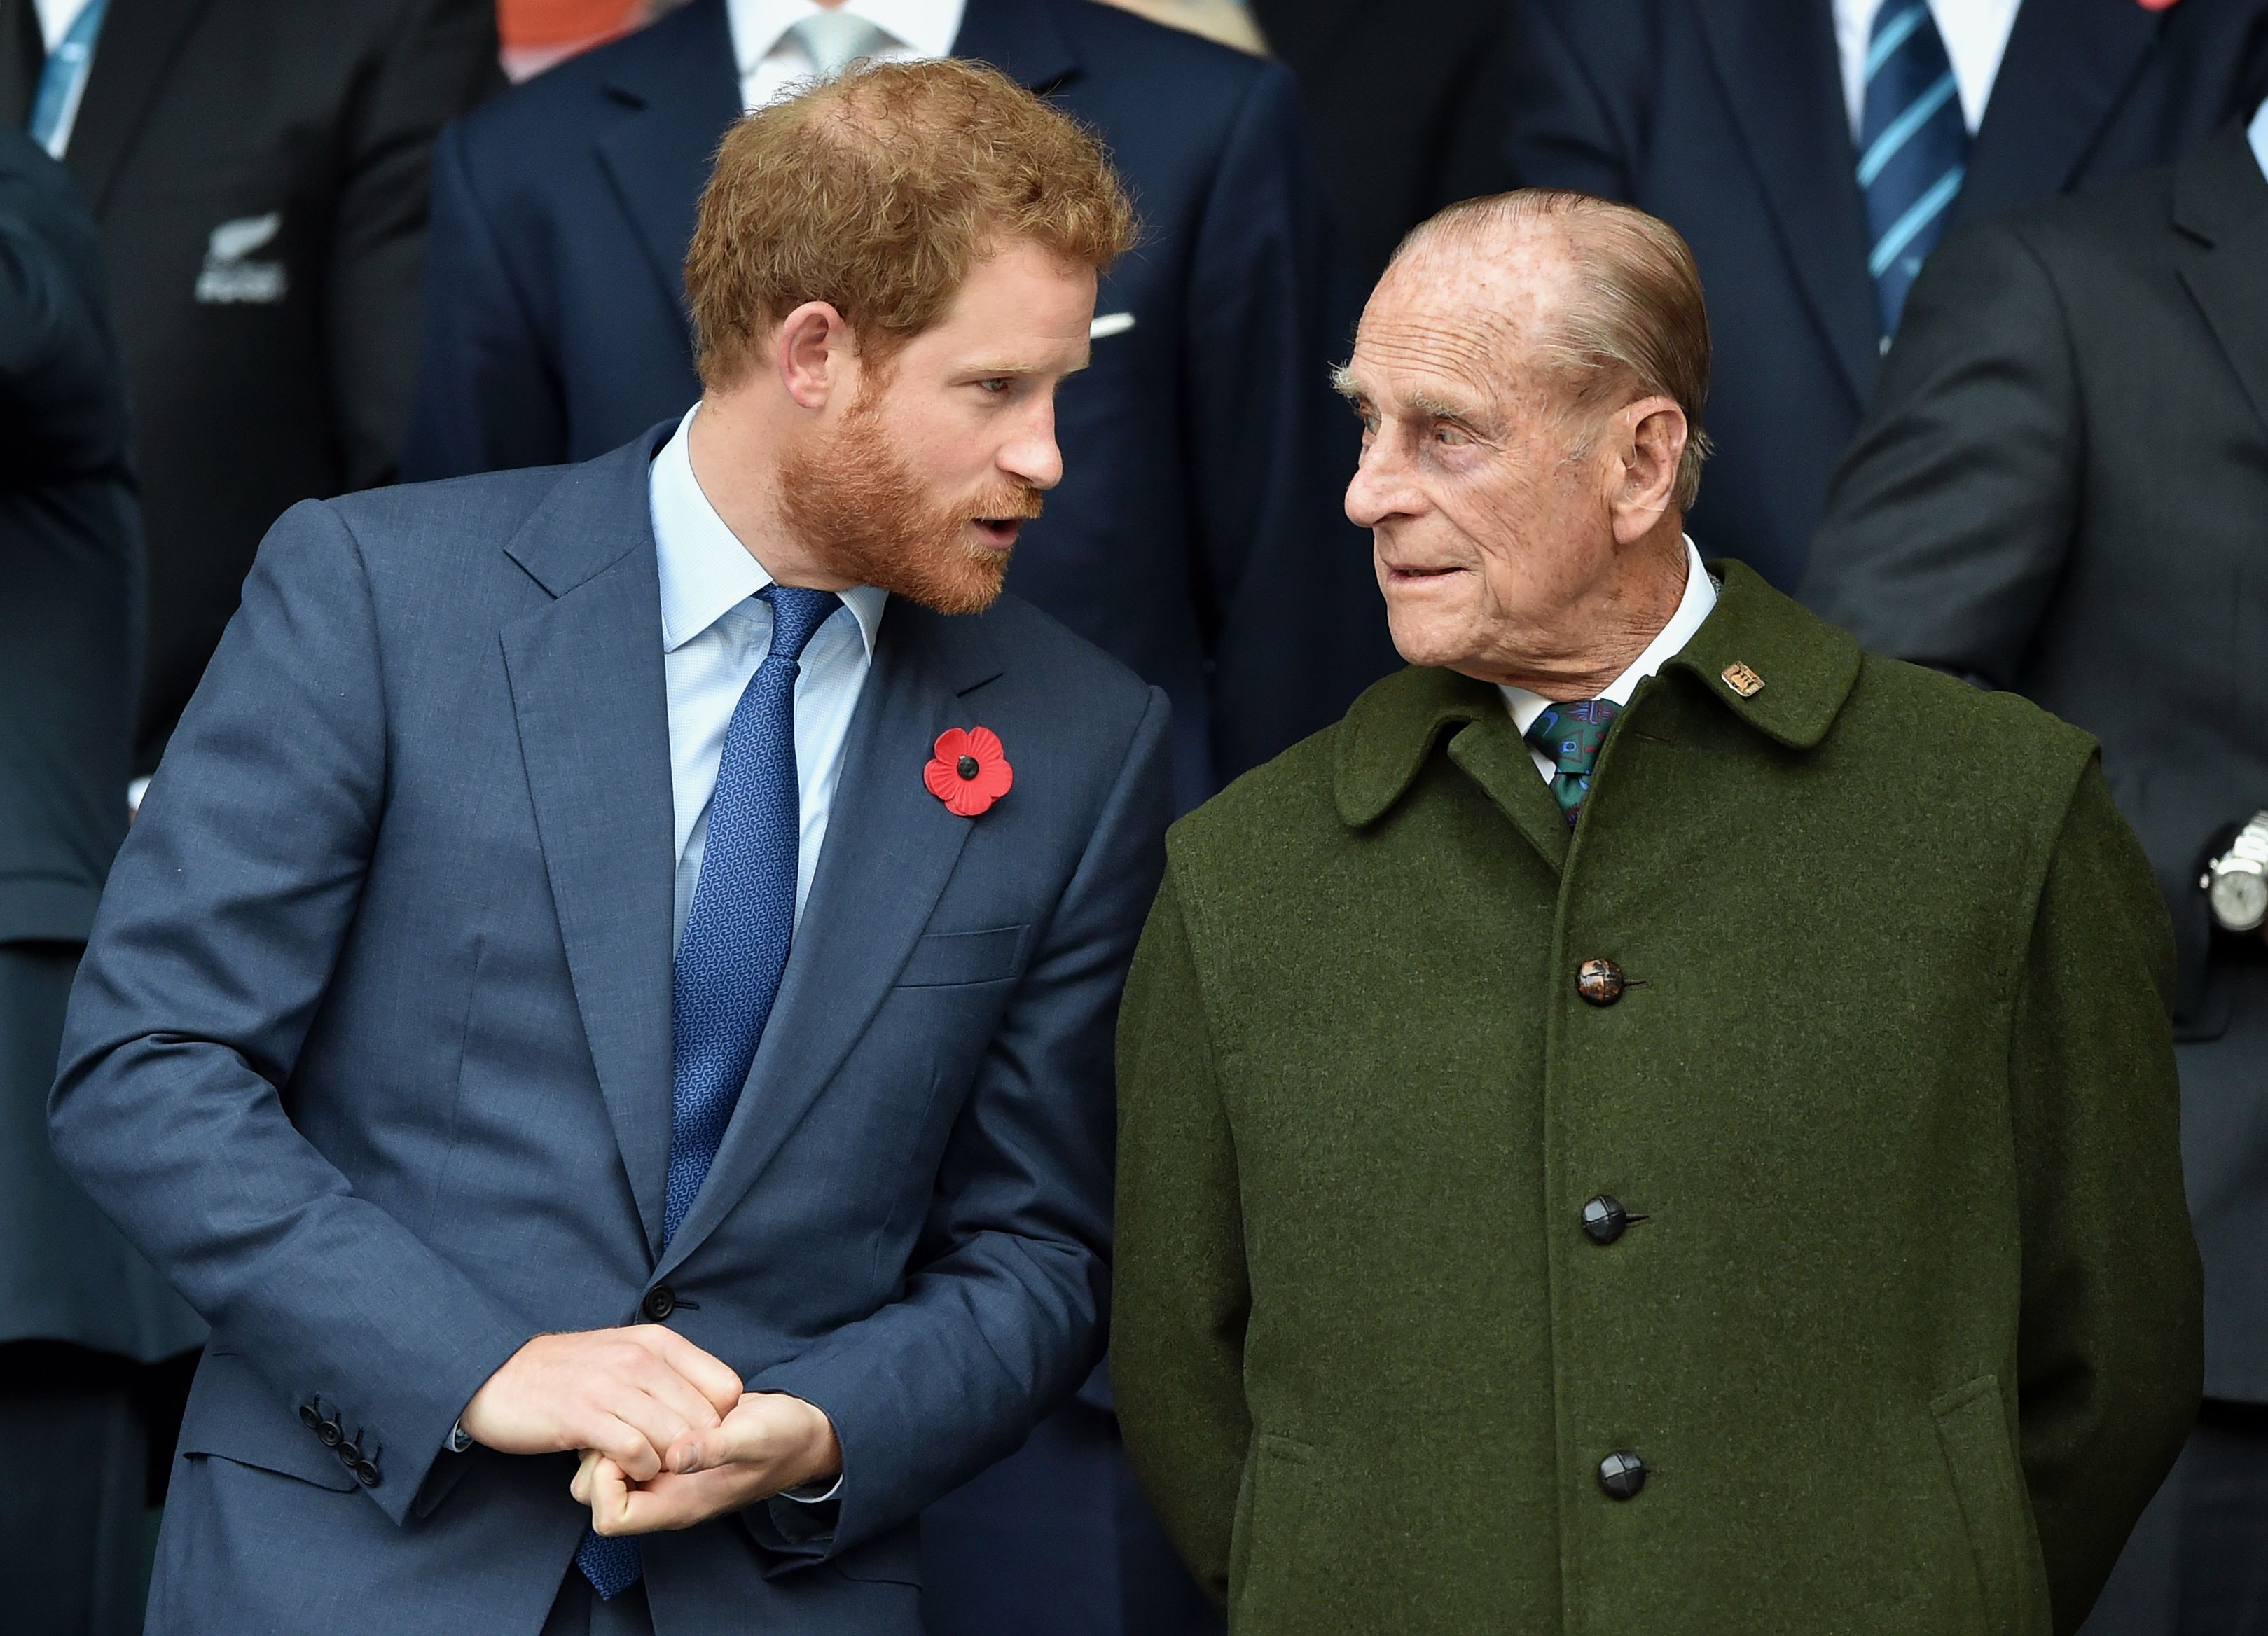 Prince Harry and Prince Philip, Duke of Edinburgh at the 2015 Rugby World Cup Final match between New Zealand and Australia at Twickenham Stadium in London, England | Photo: Getty Images